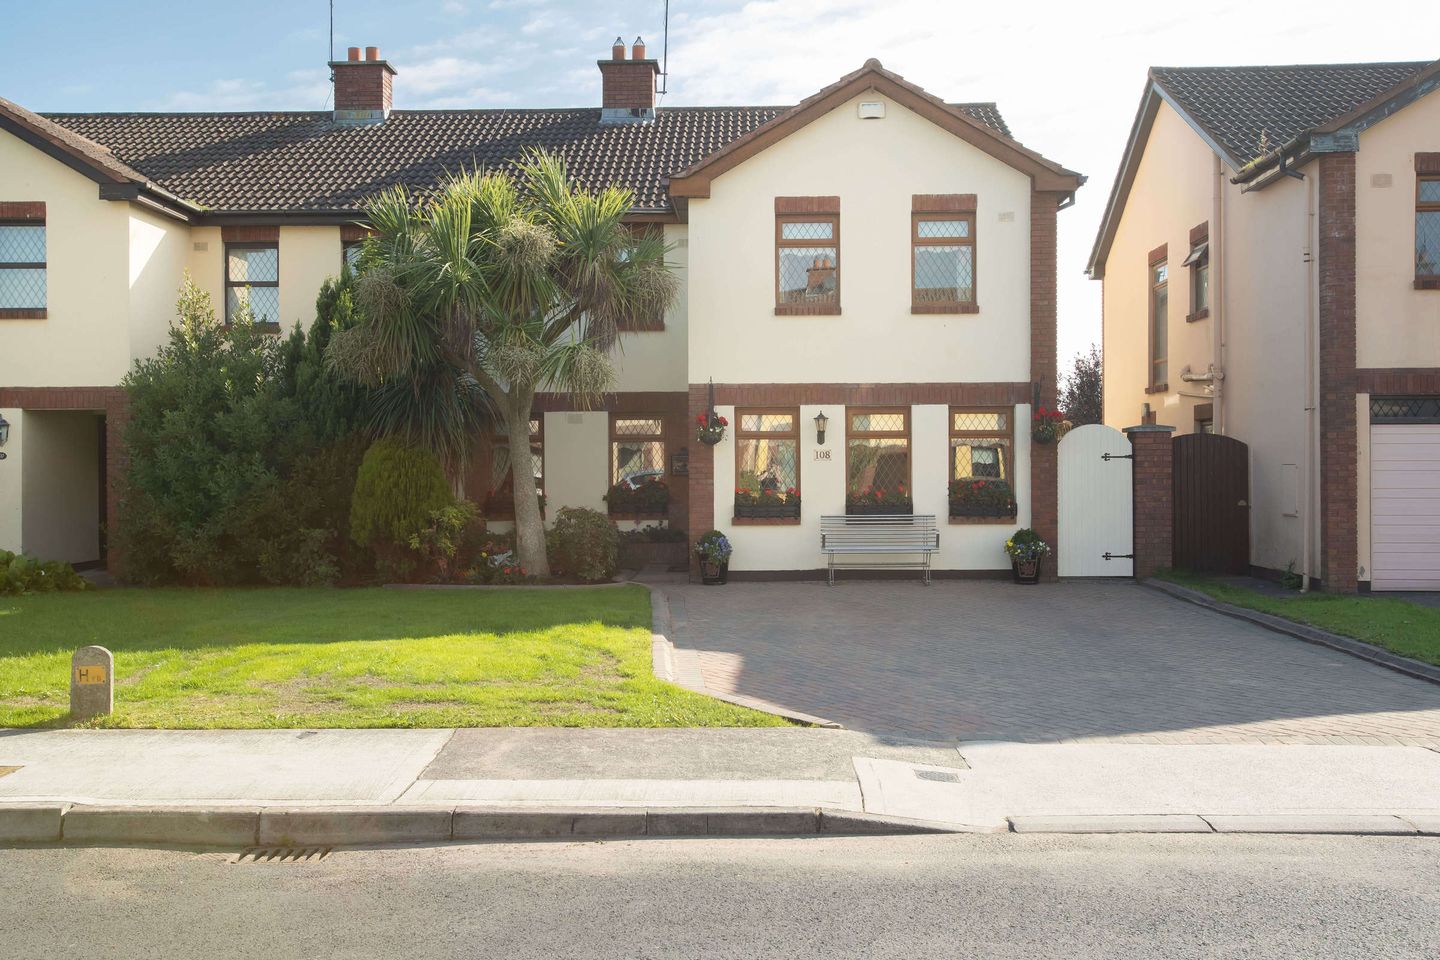 108 Manydown Close, Red Barns Road, Dundalk, Co. Louth